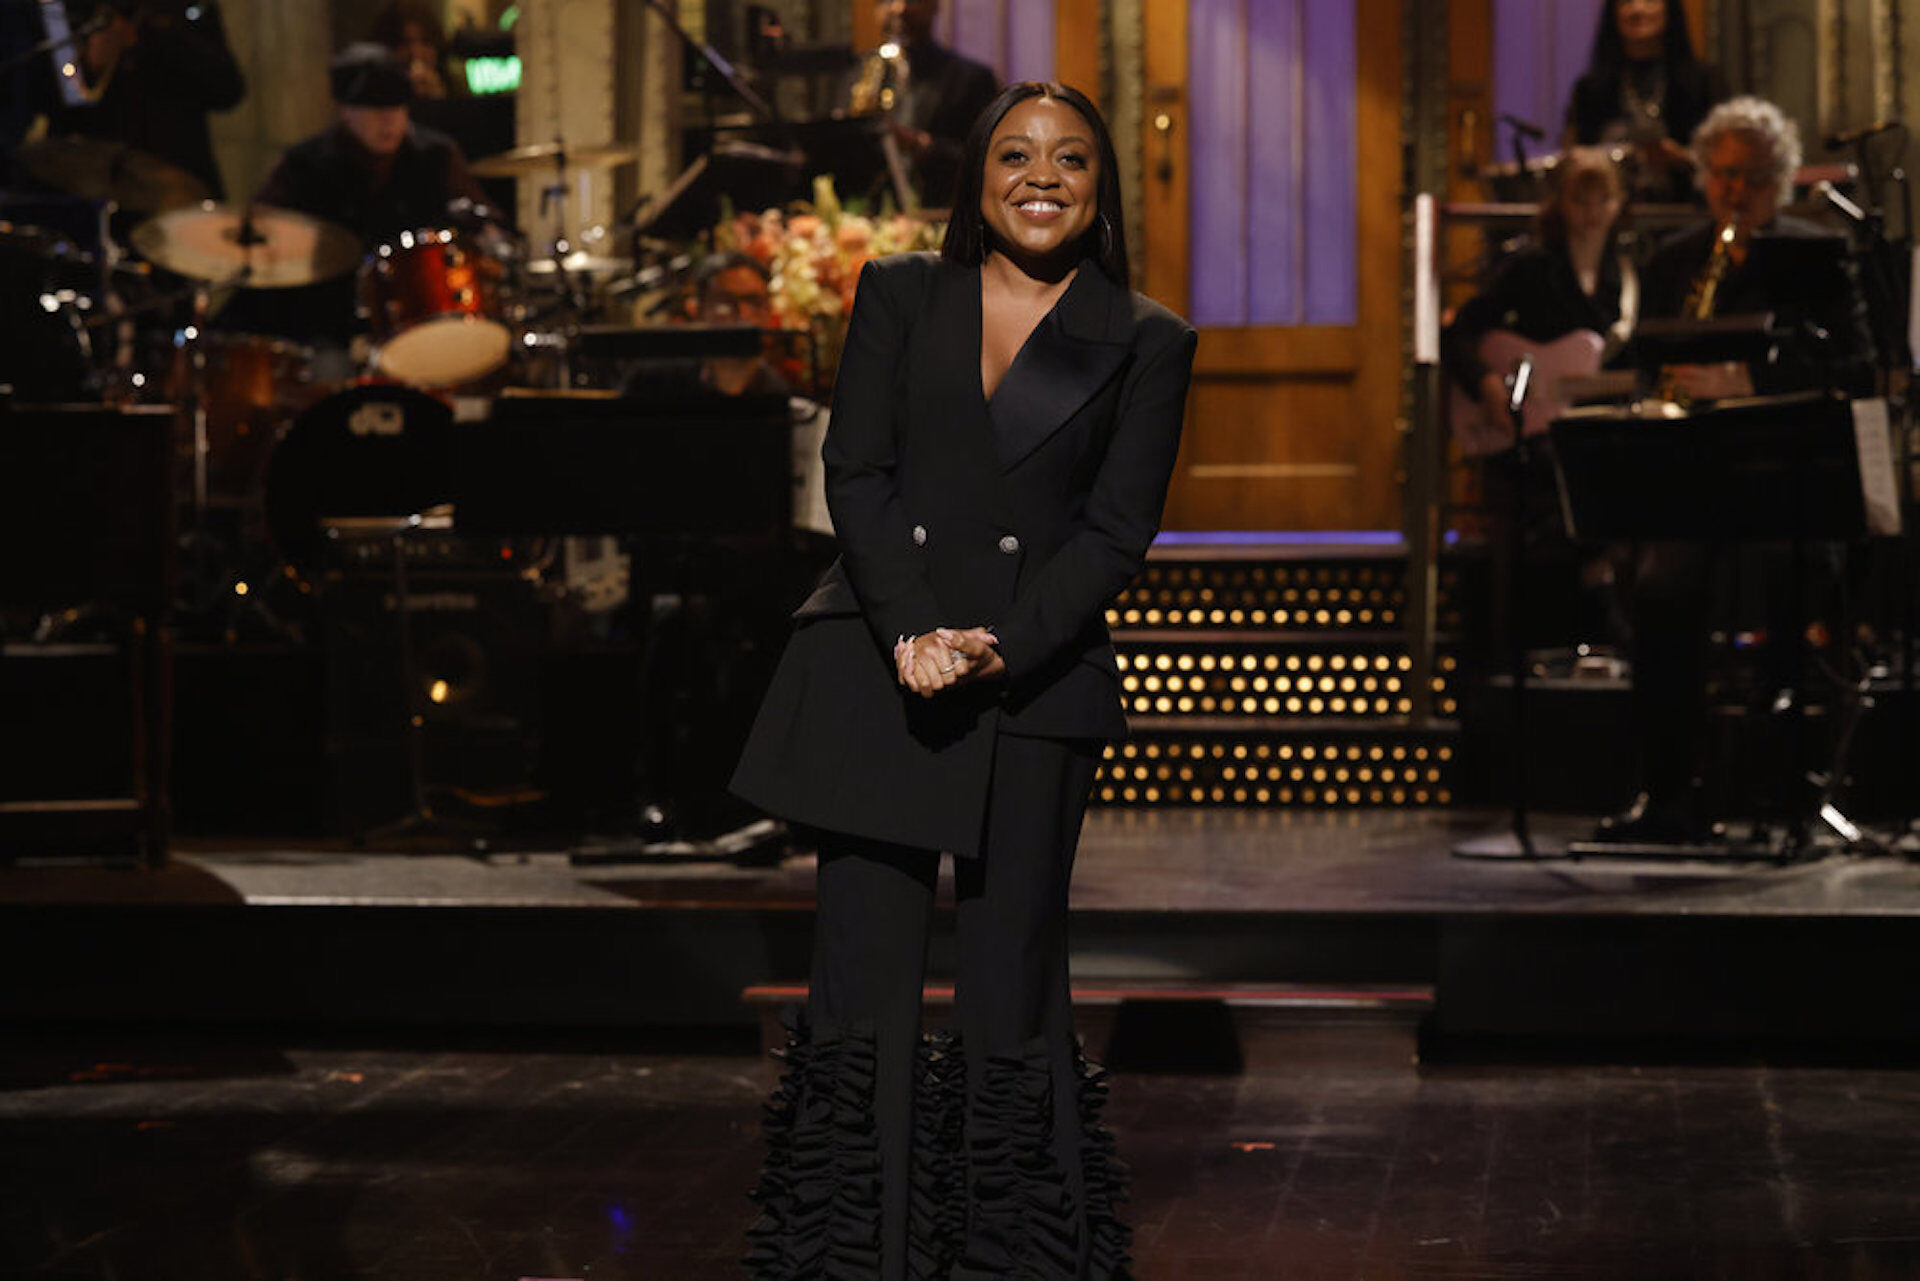 Quinta Brunson made her 'SNL' debut this weekend, where she used her monologue to uplift teachers and highlight their importance.